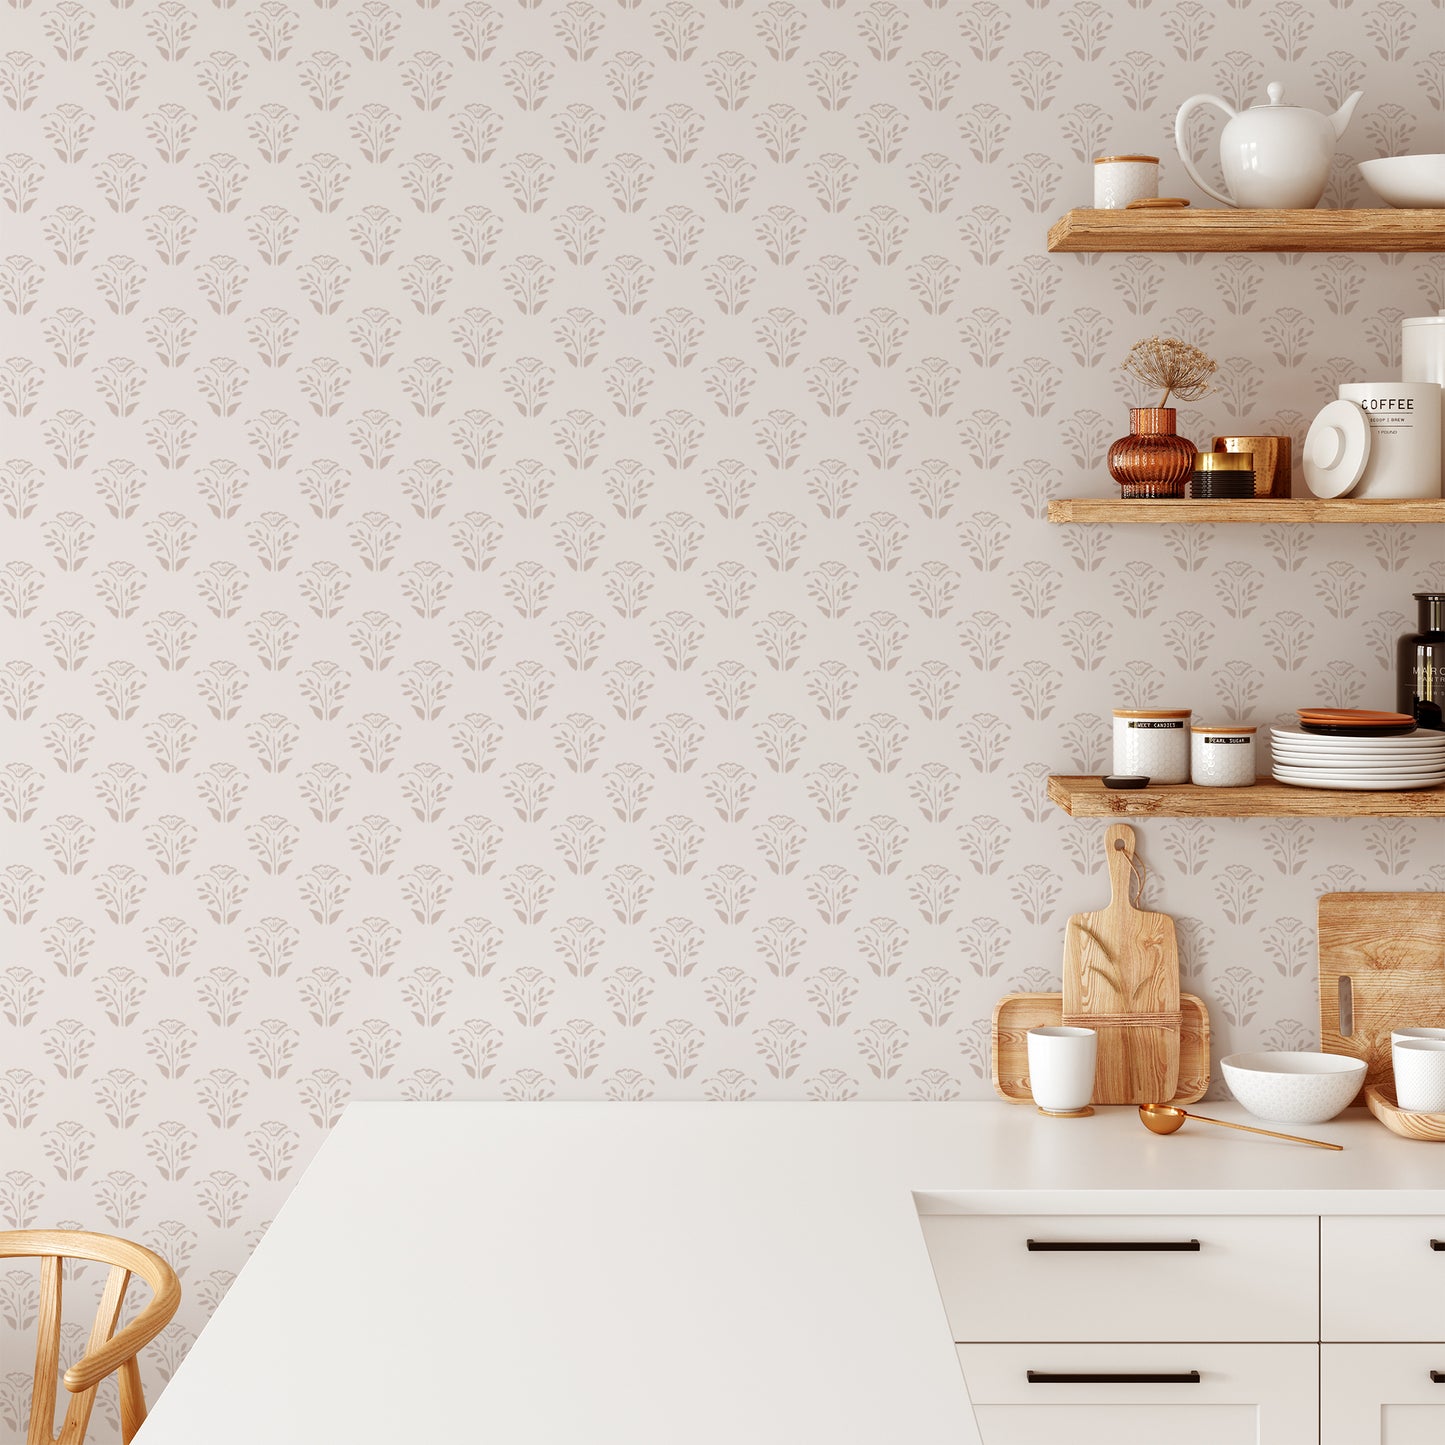 Kitchen wall featuring the Lulu Peel and Stick Wallpaper in bone by Jackie O'Bosky. Floral motifs placed symettrically in neutral taupe and bone colors. 